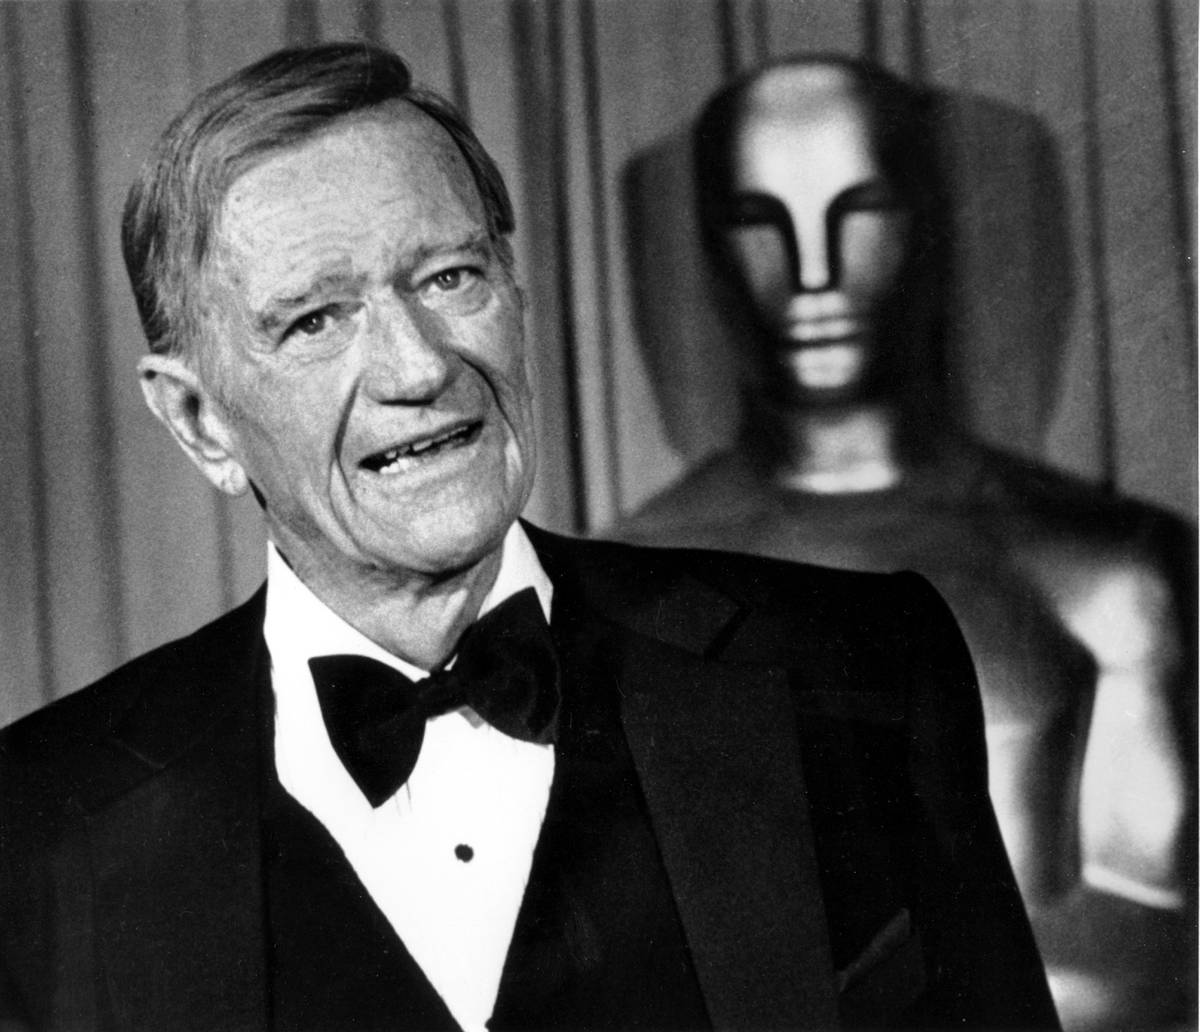 Actor John Wayne is shown at the 51st Annual Academy Awards in Hollywood, Ca. on April 9, 1979. ...